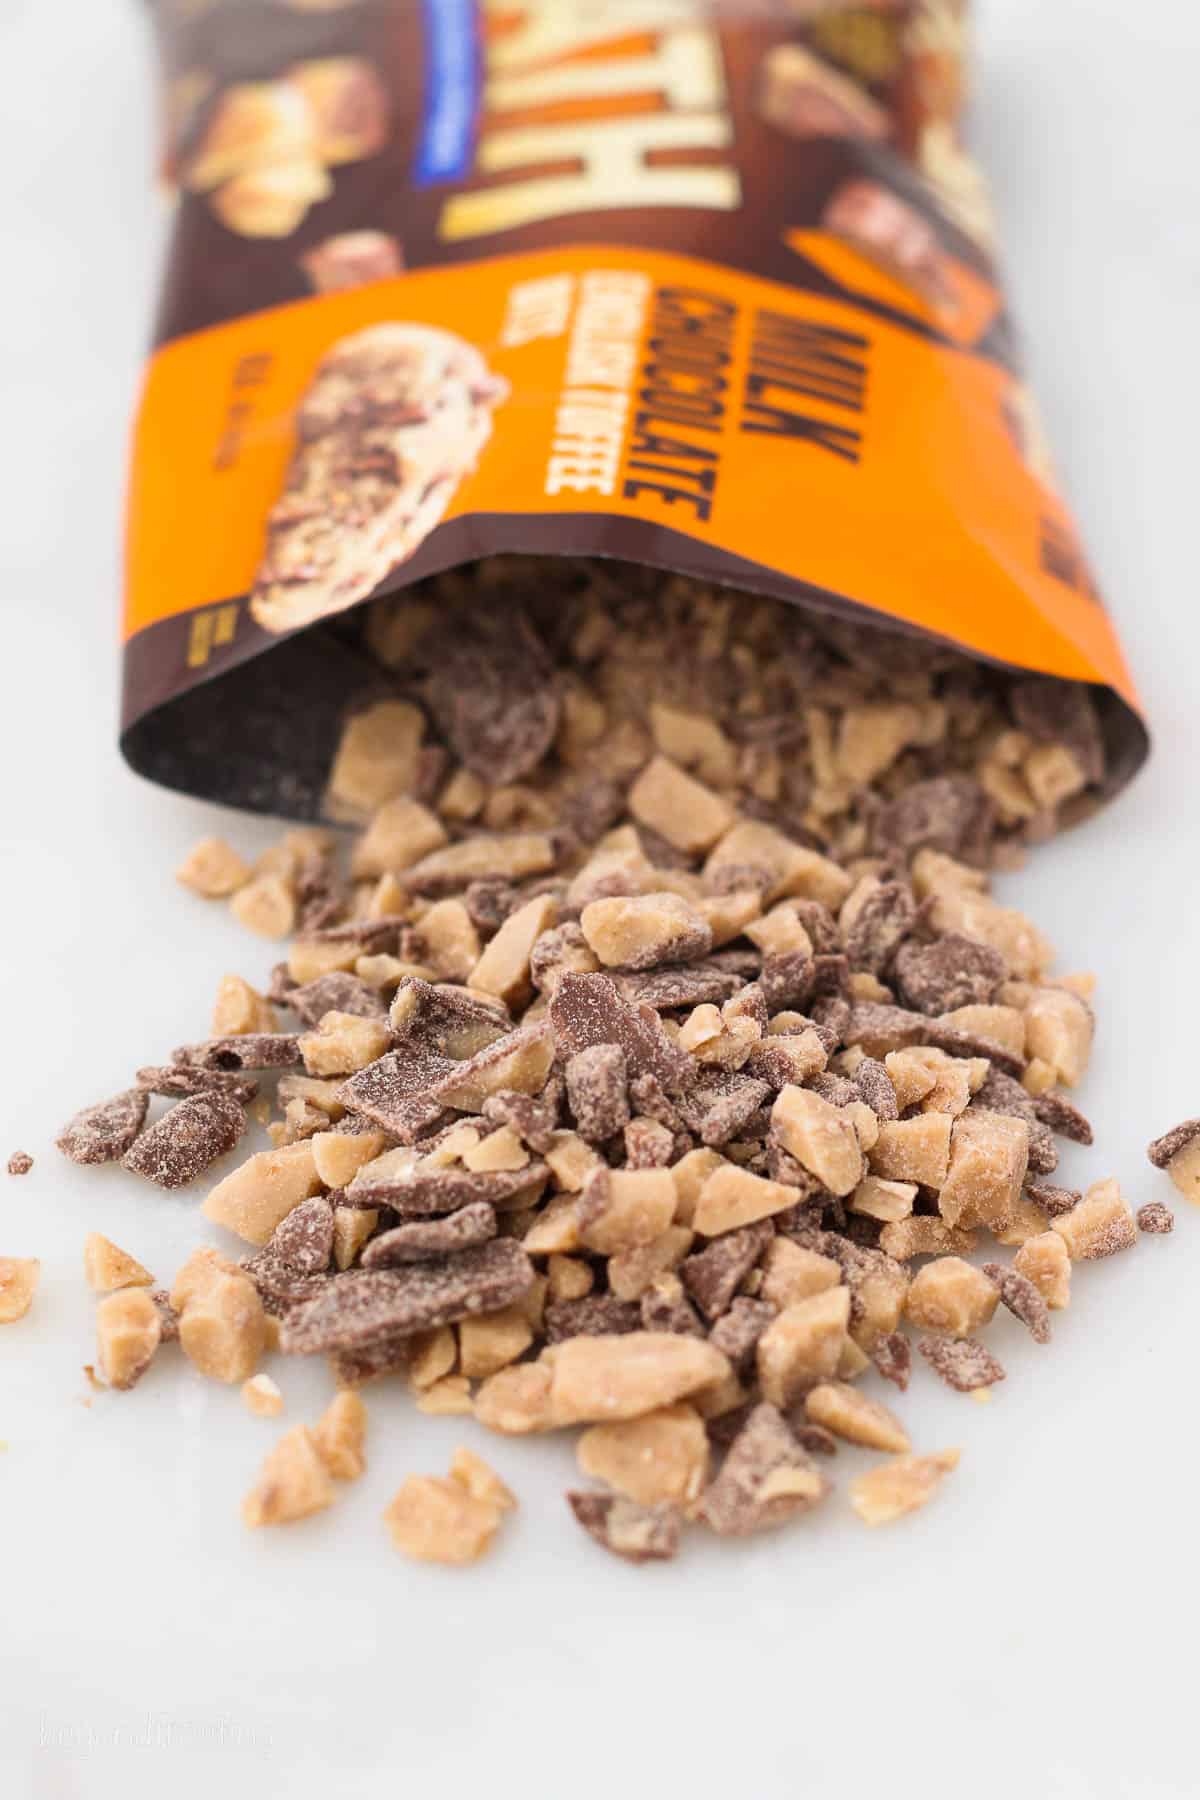 a bag of Heath Bar Milk Chocolate Toffee poured out on the counter